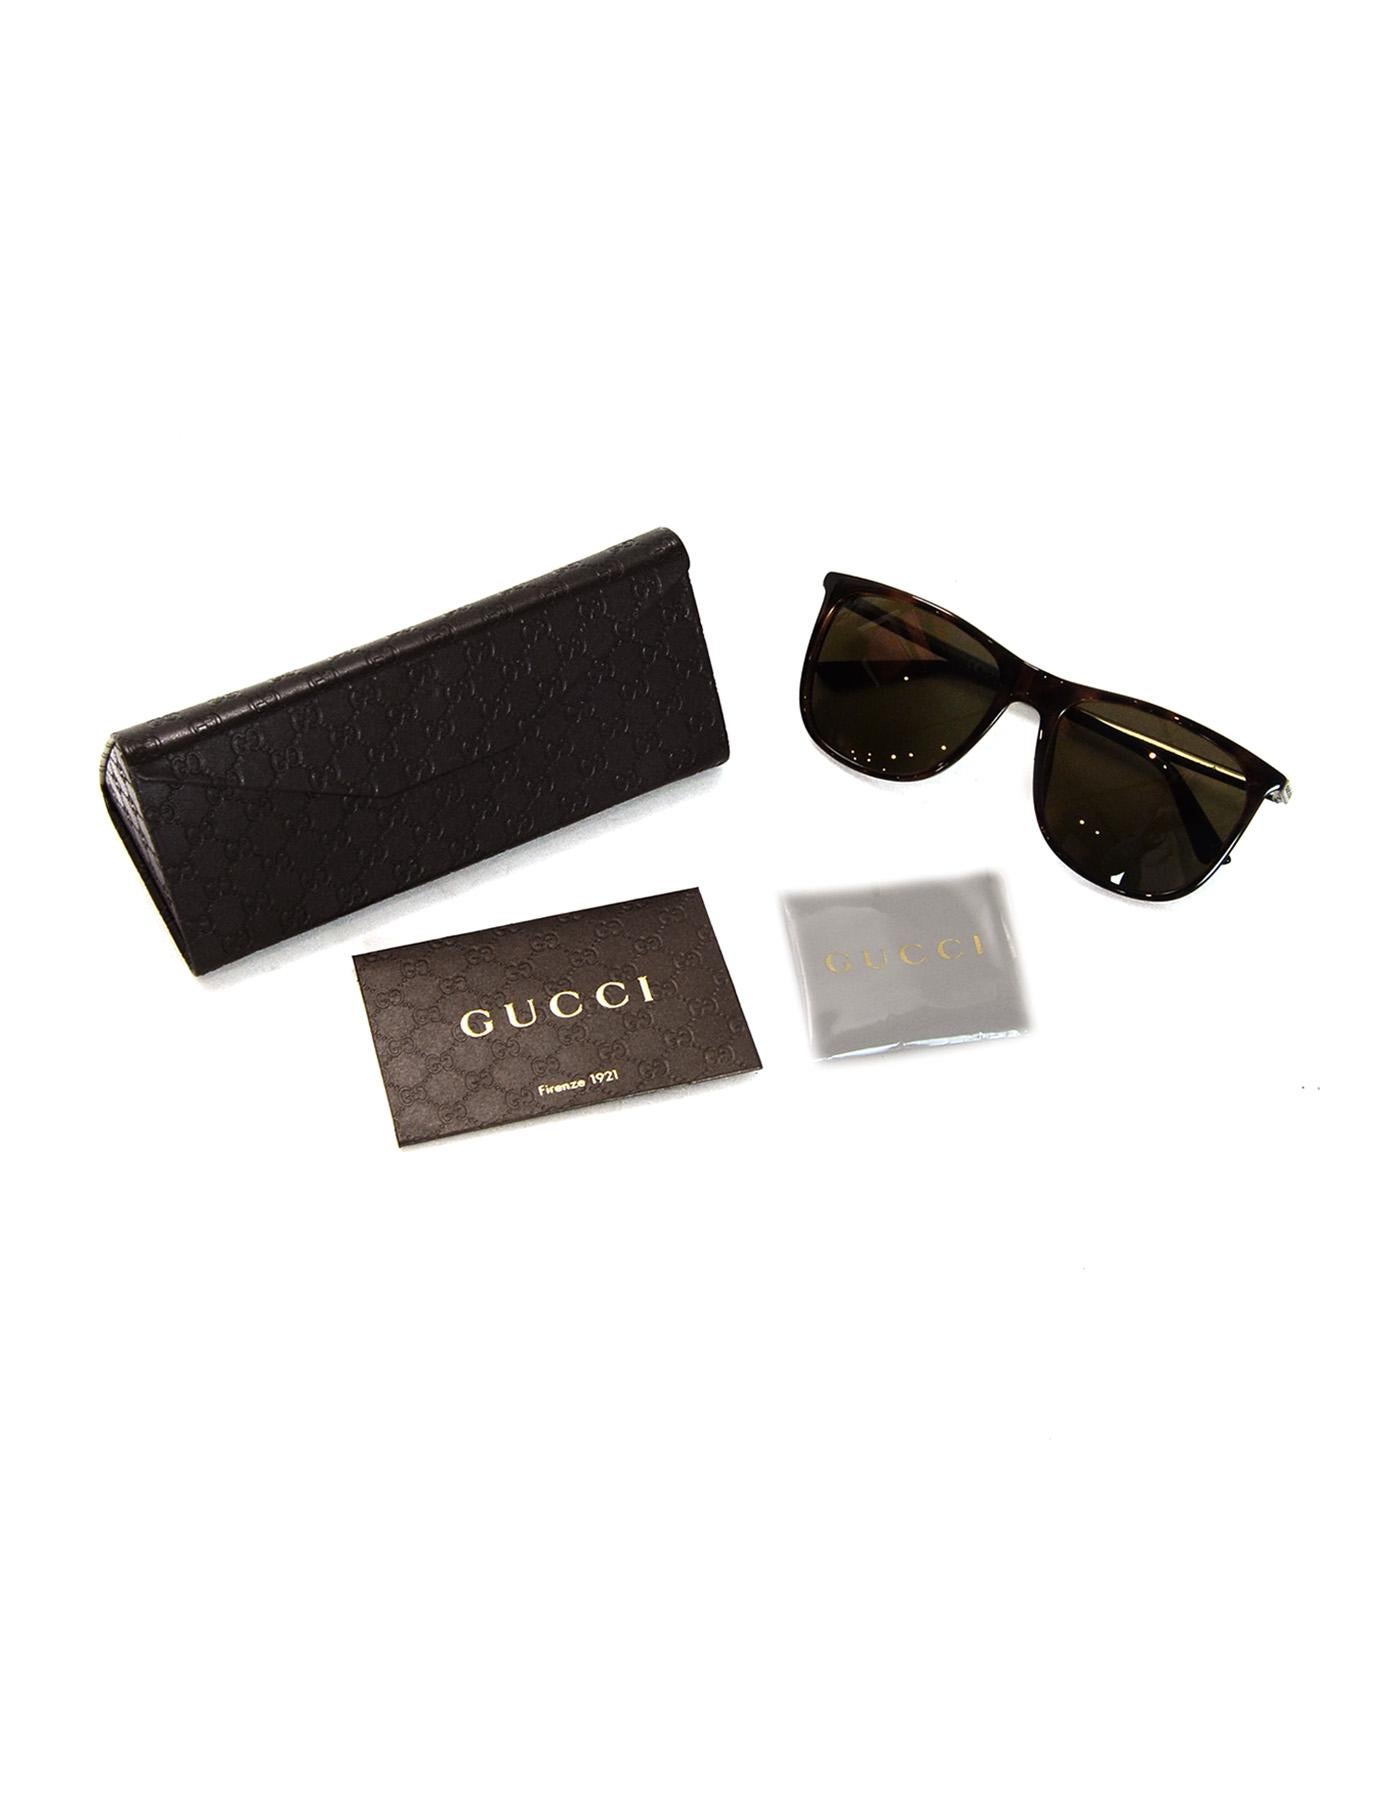 Gucci Brown Square-Frame Acetate Sunglasses W/ Metal Red/Green Arm Web. Includes Case & Cloth 

Made In: Italy
Color: Brown w/ red & green metal arms
Hardware: Gunmetal
Materials: Acetate and metal
Overall Condition: Excellent pre-owned